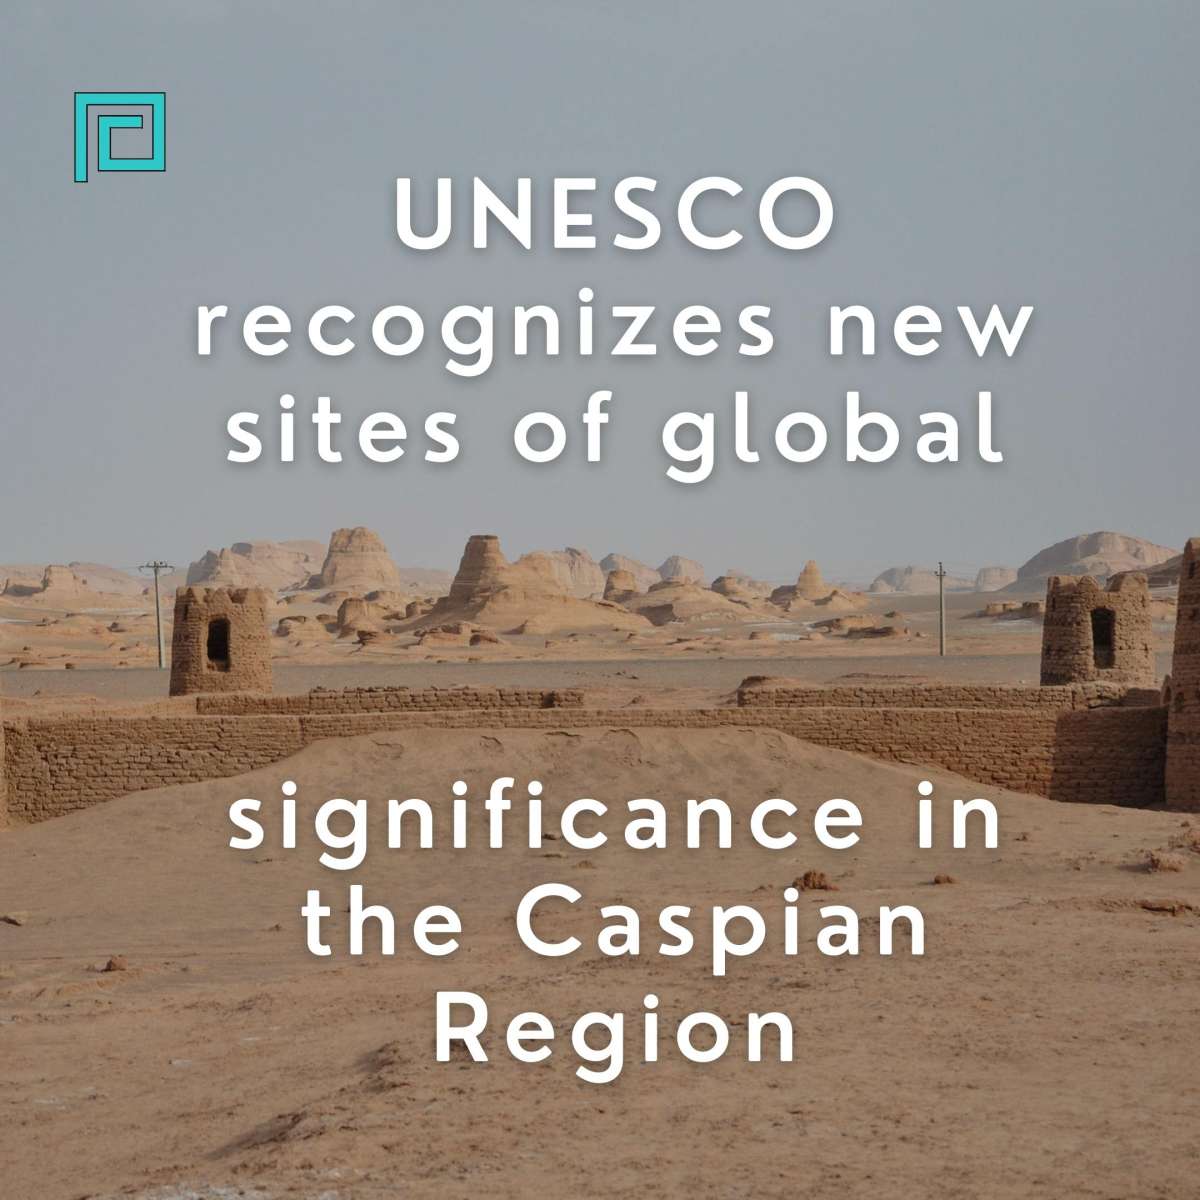 UNESCO recognizes new sites of global significance in the Caspian Region